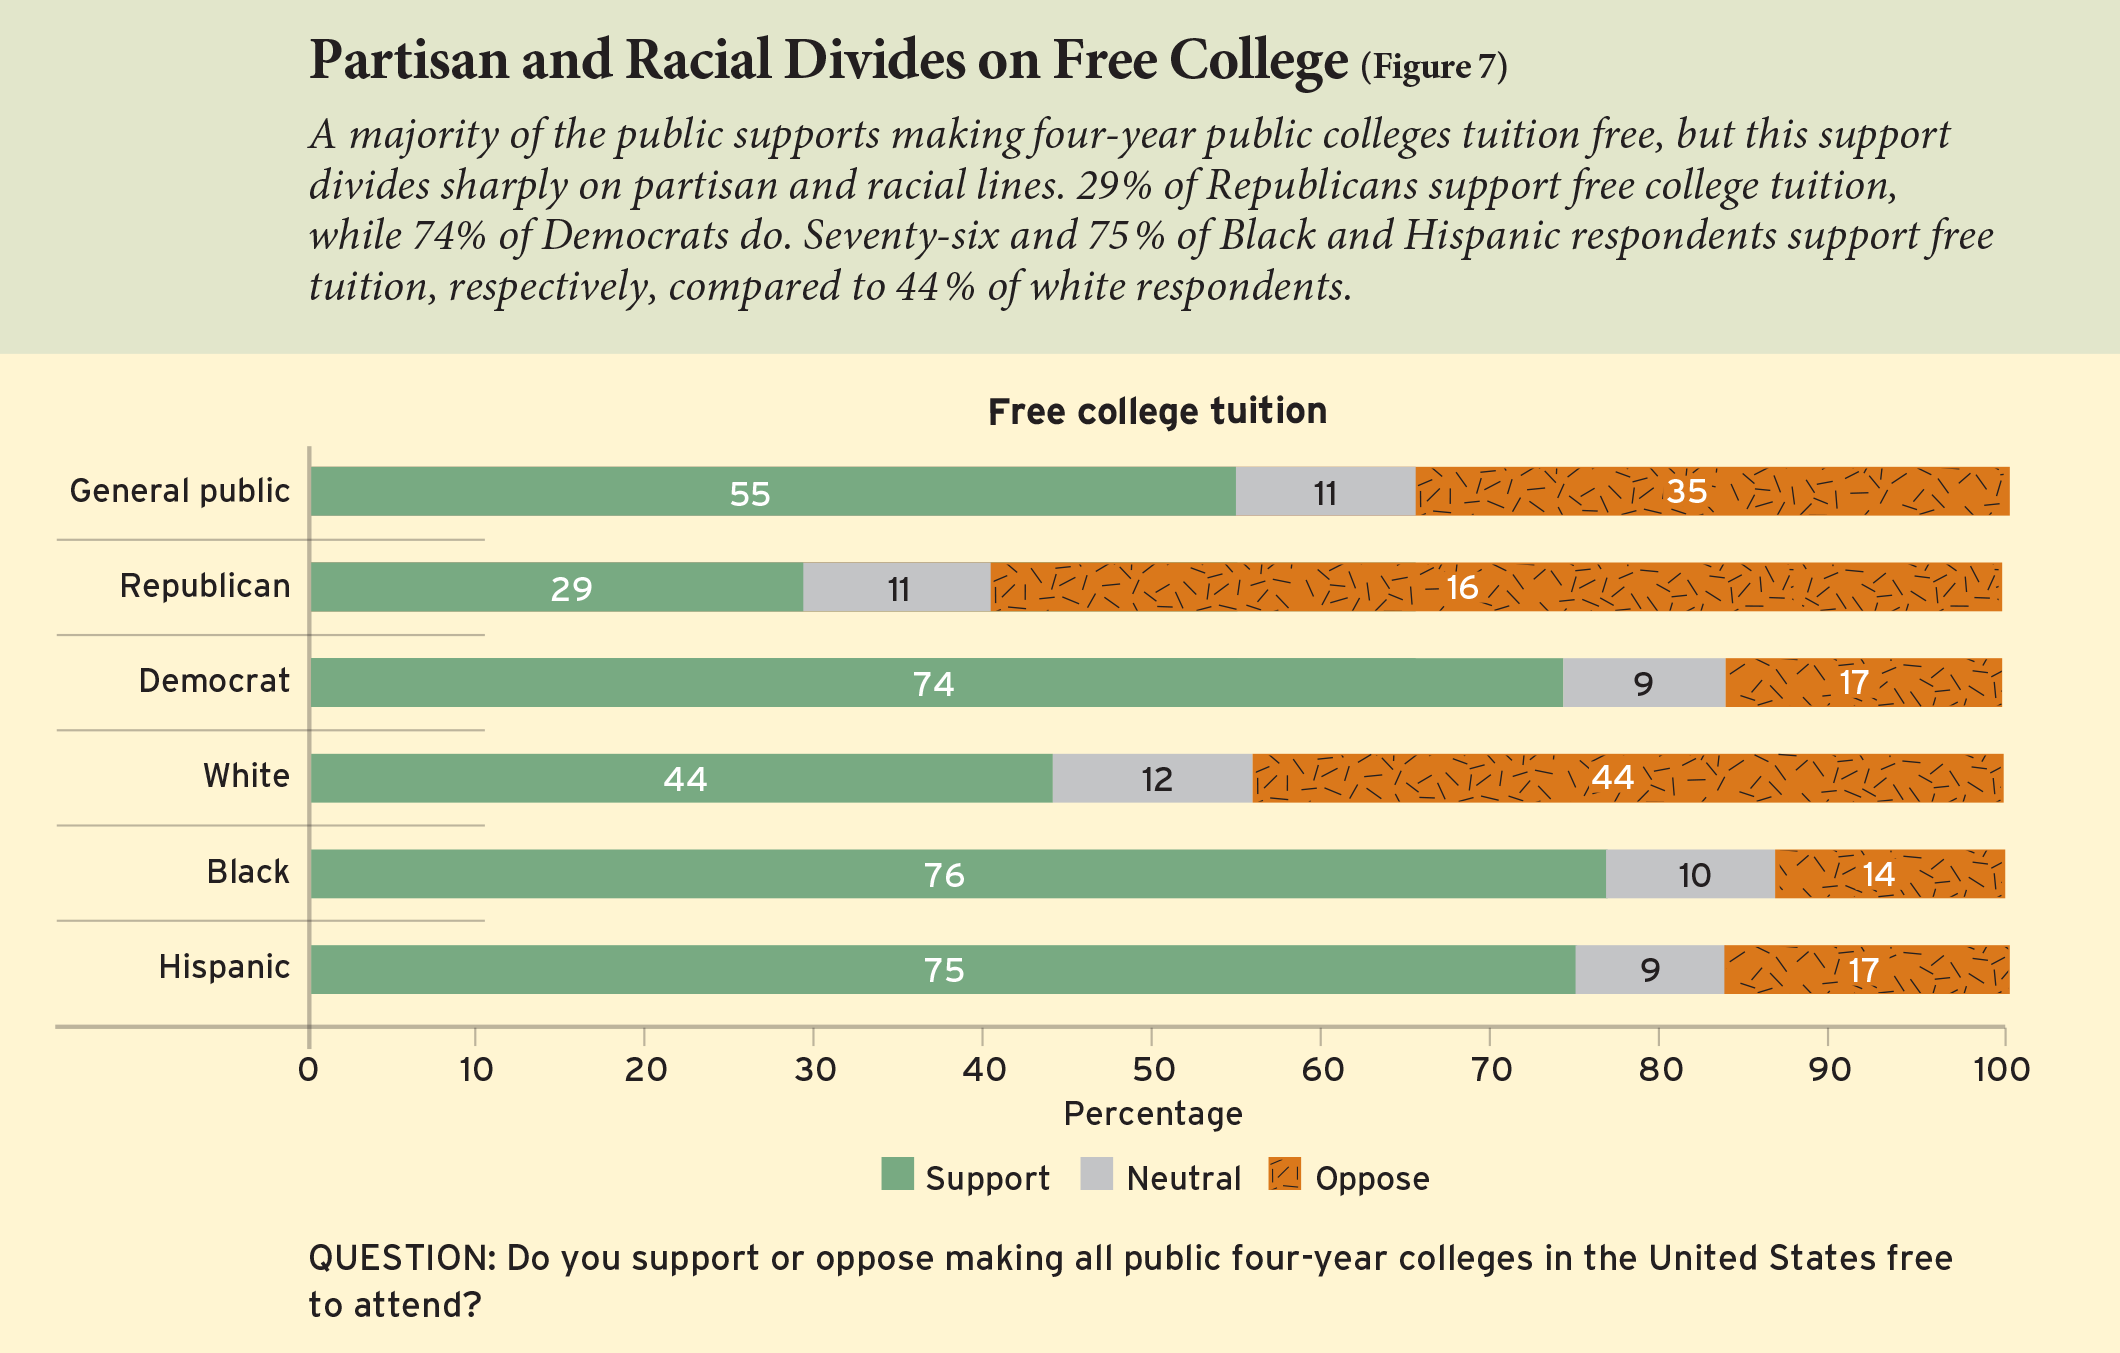 Figure 7: Partisan and Racial Divides on Free College